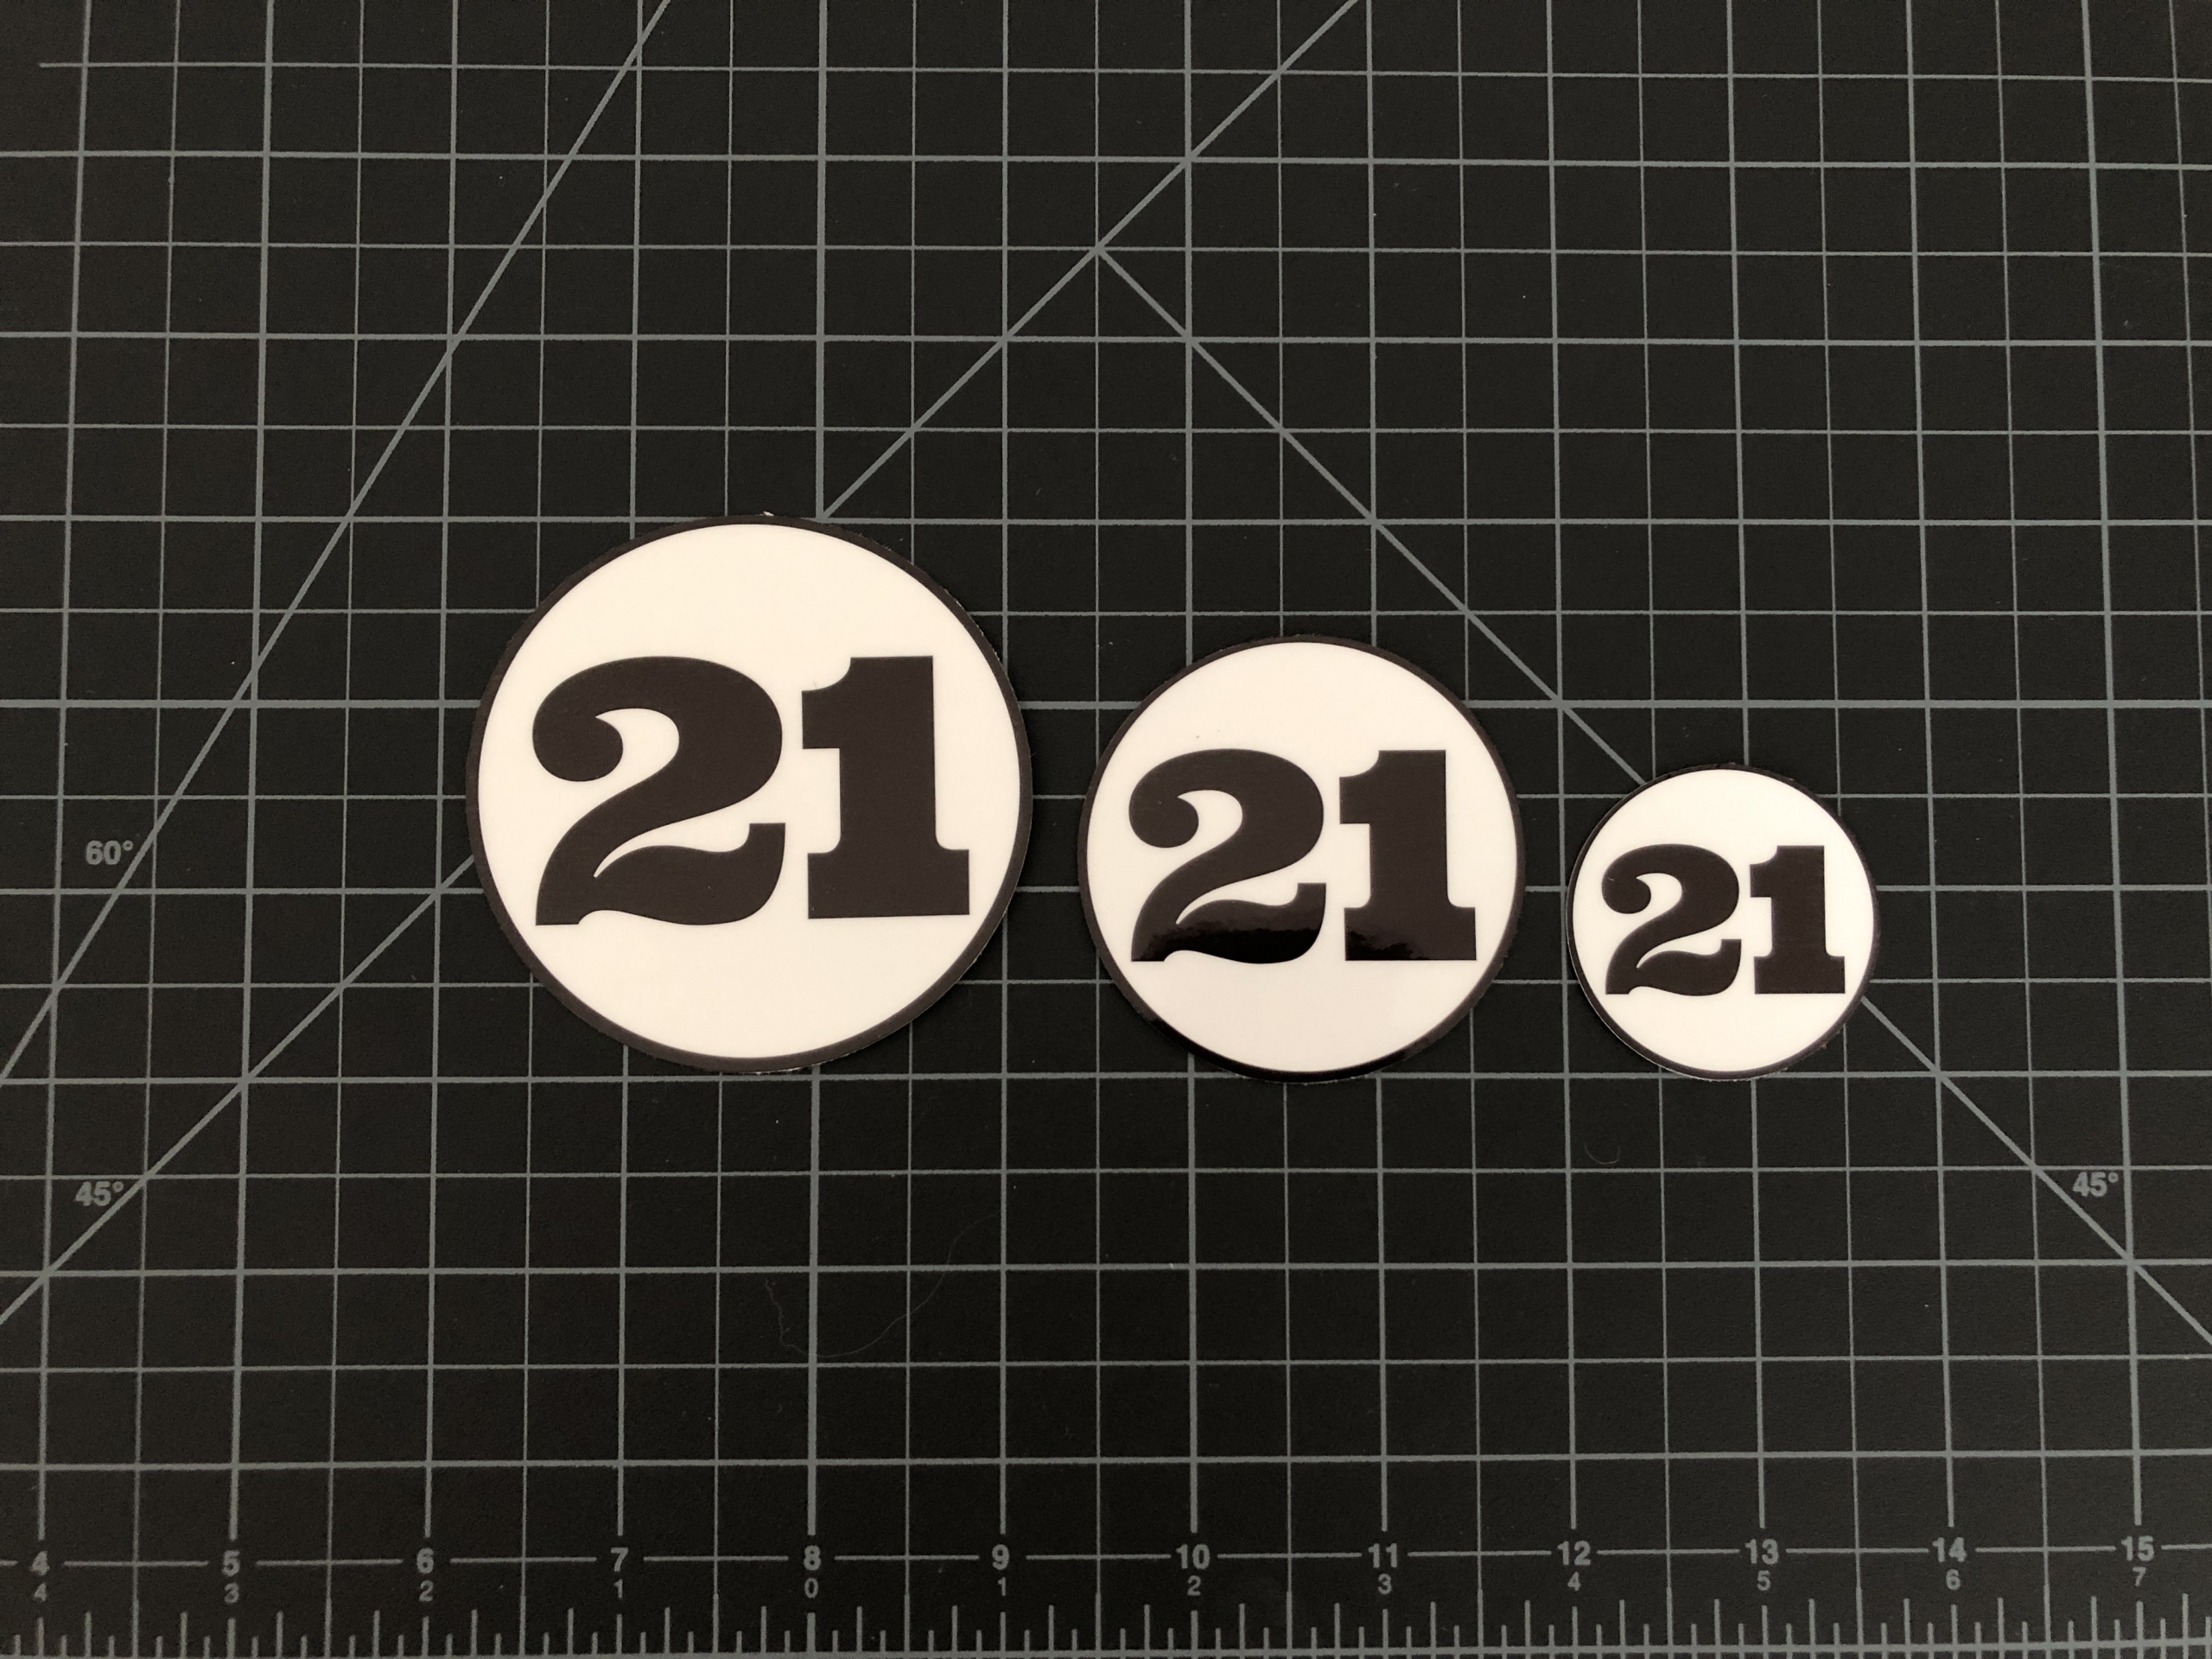 Custom Number Stickers - Die Cut - RC SWAG - Stickers, T-Shirts